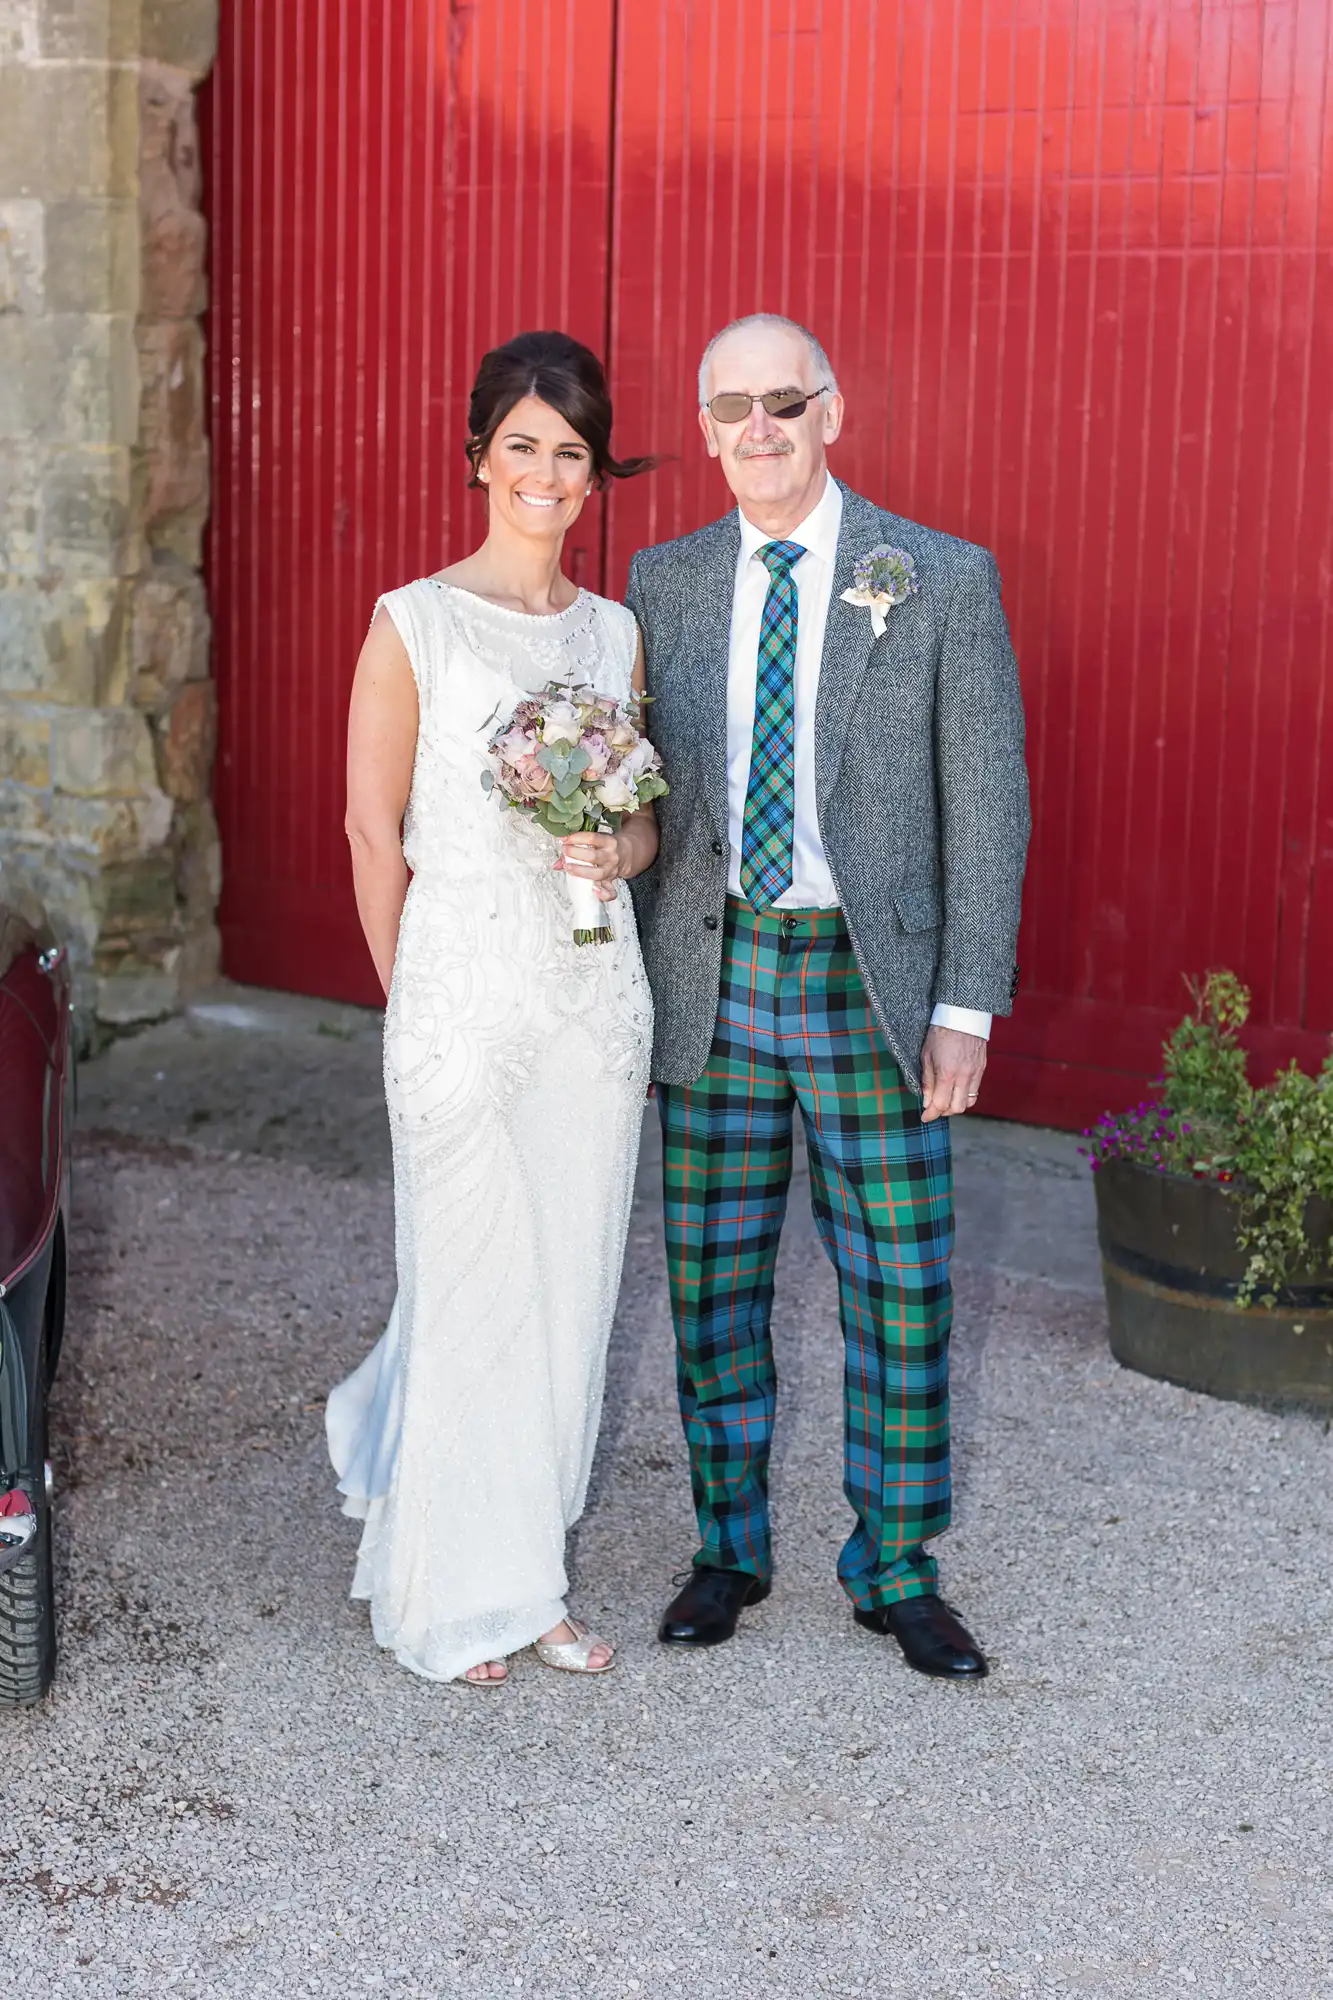 A bride in a white beaded gown stands beside a groom in a grey jacket and vibrant tartan trousers, both smiling, against a red barn backdrop.